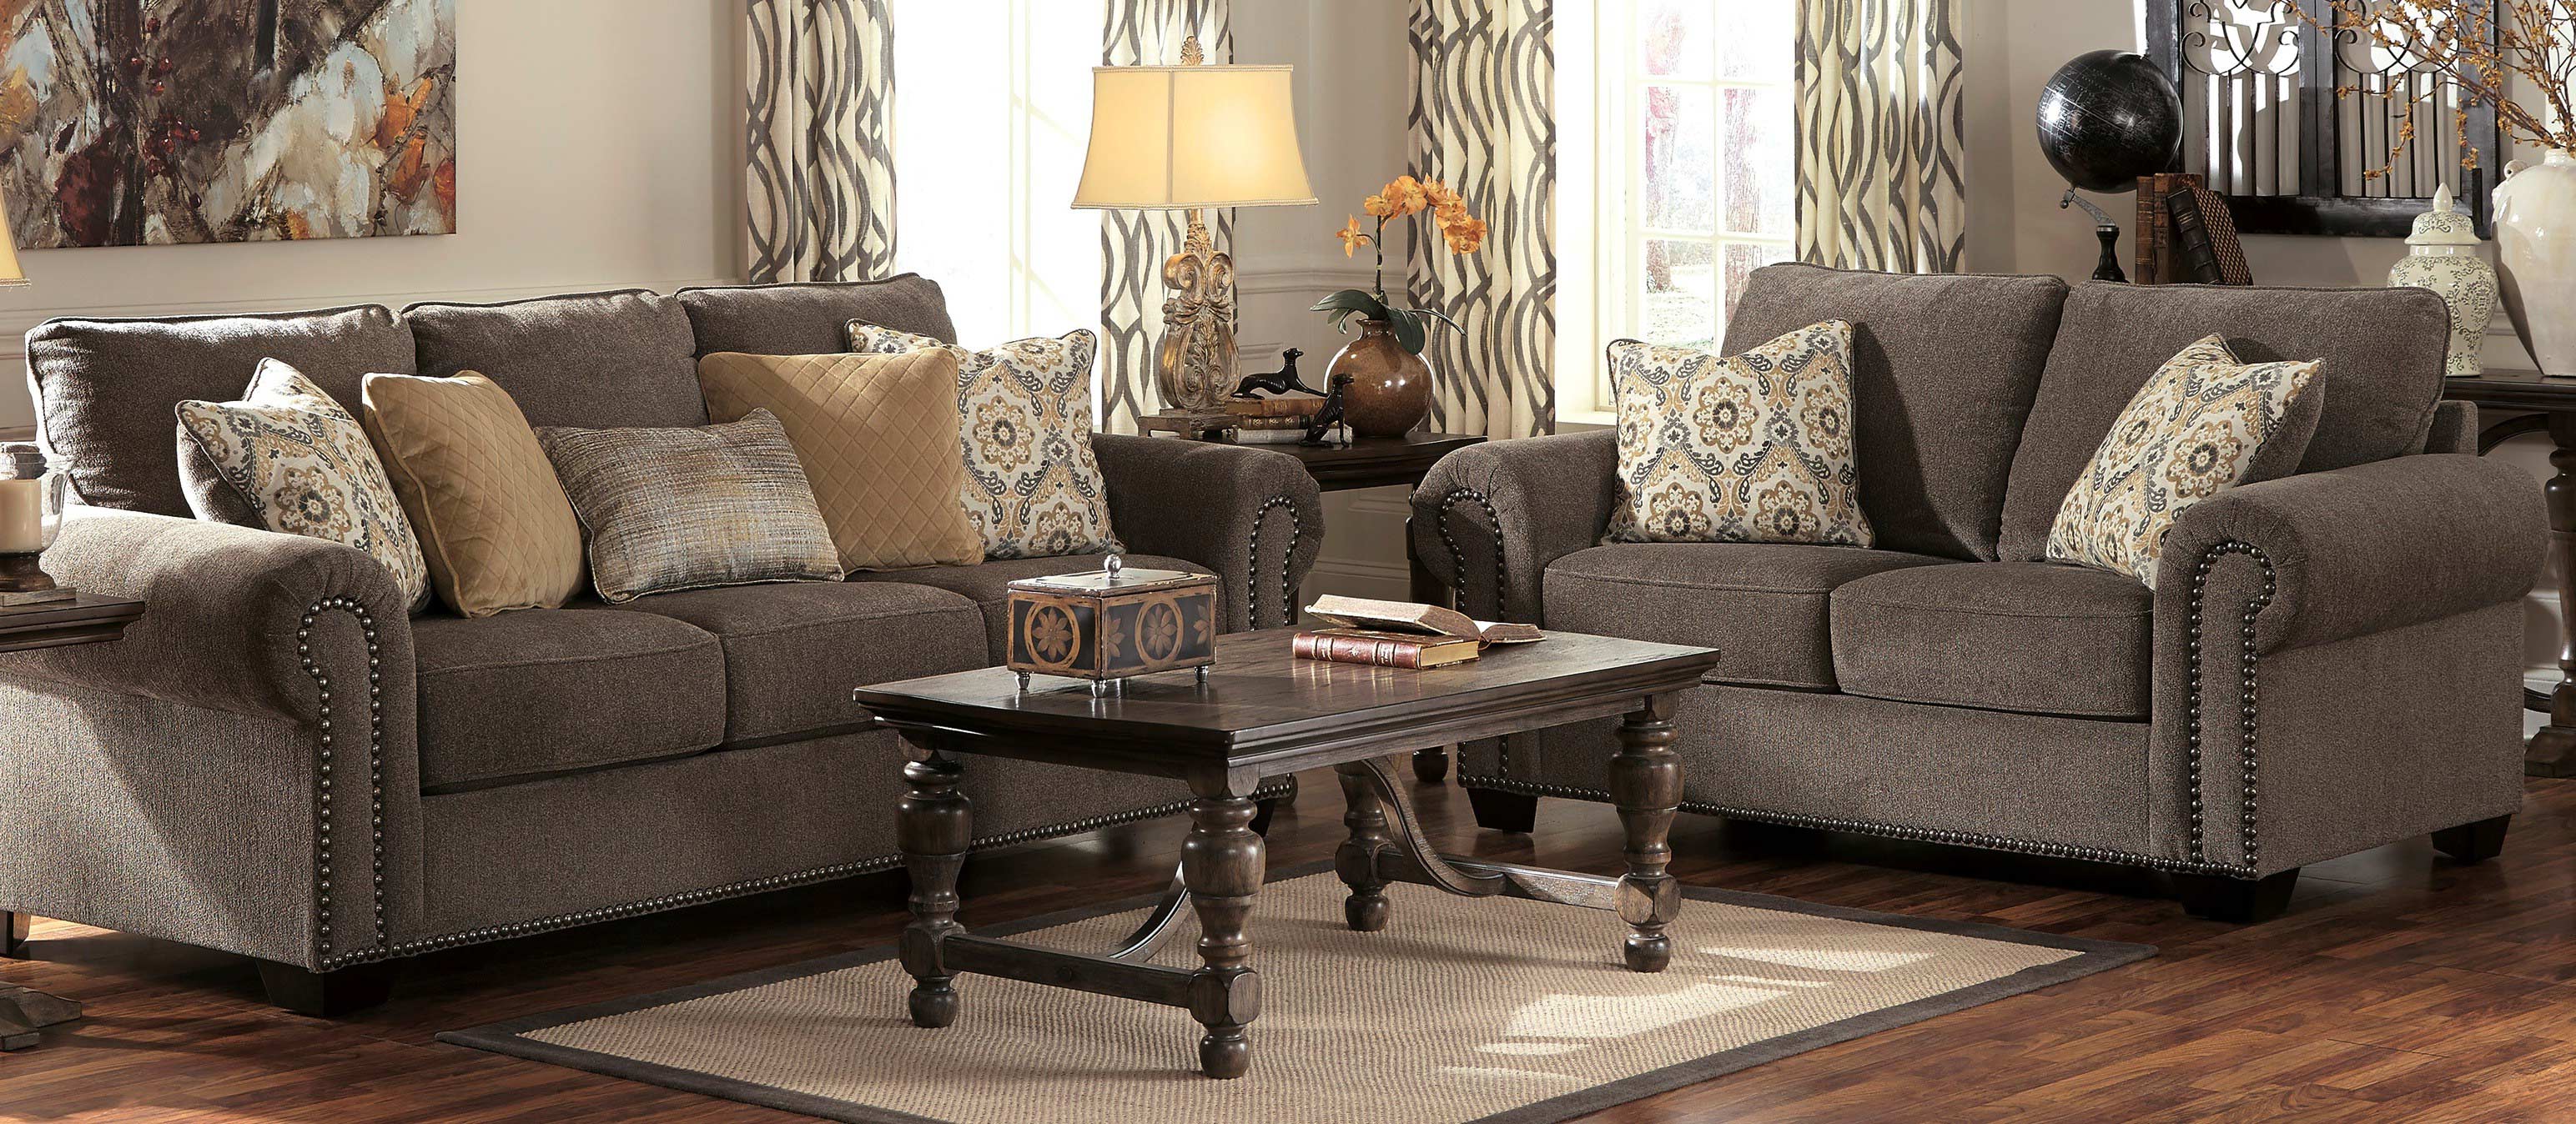 Living Room Furniture At Rooms To Go